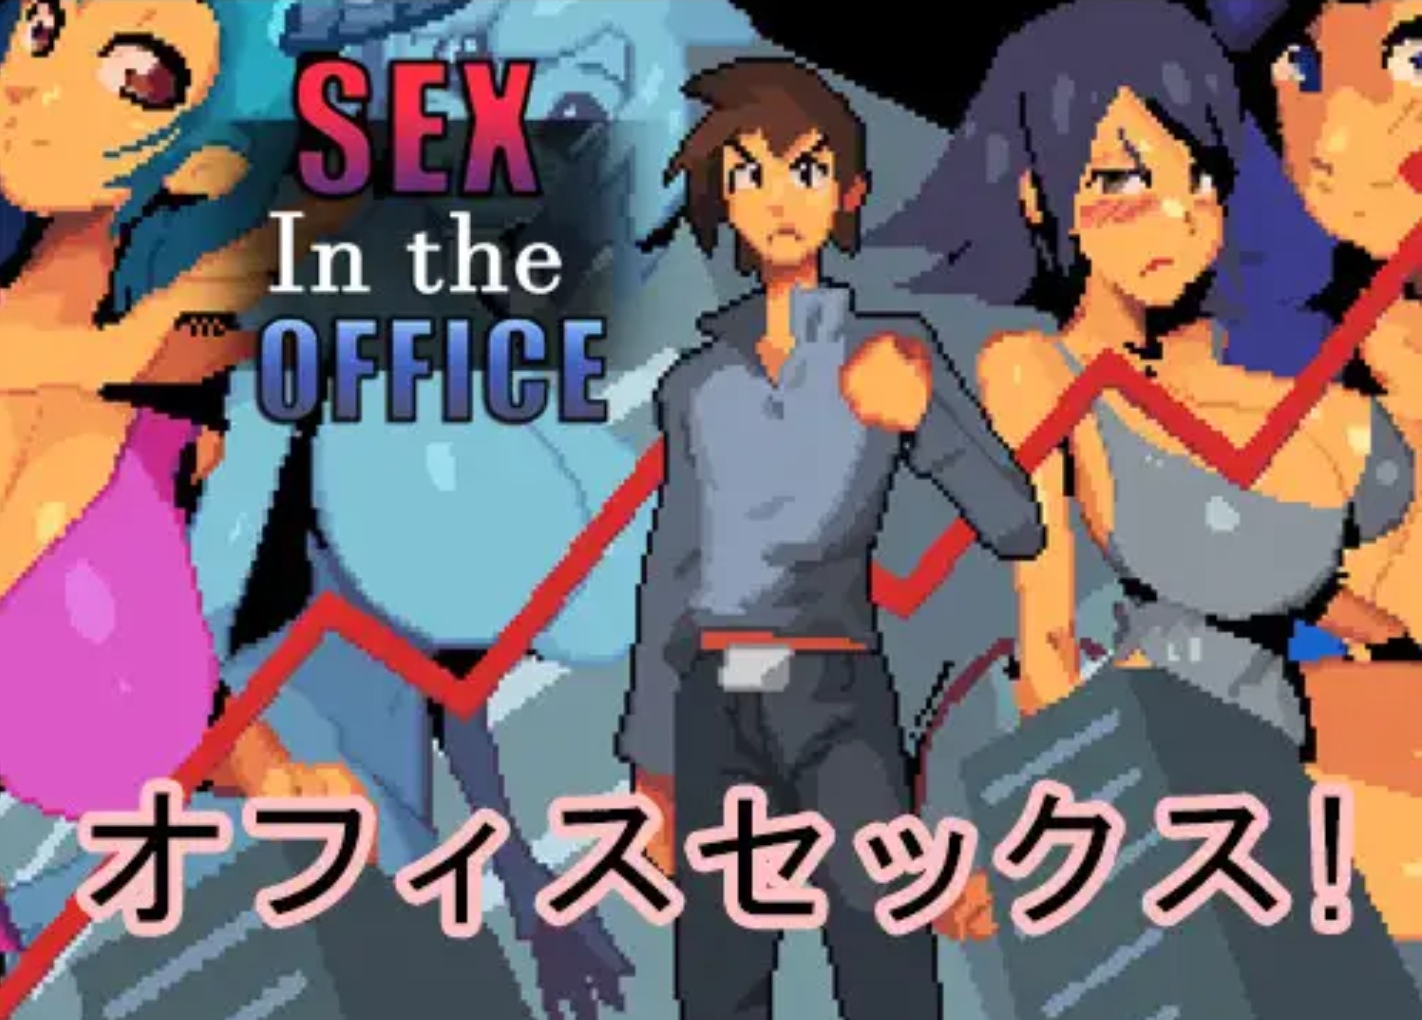 1gb Sex - Download Free Hentai Game Porn Games Sex in the Office